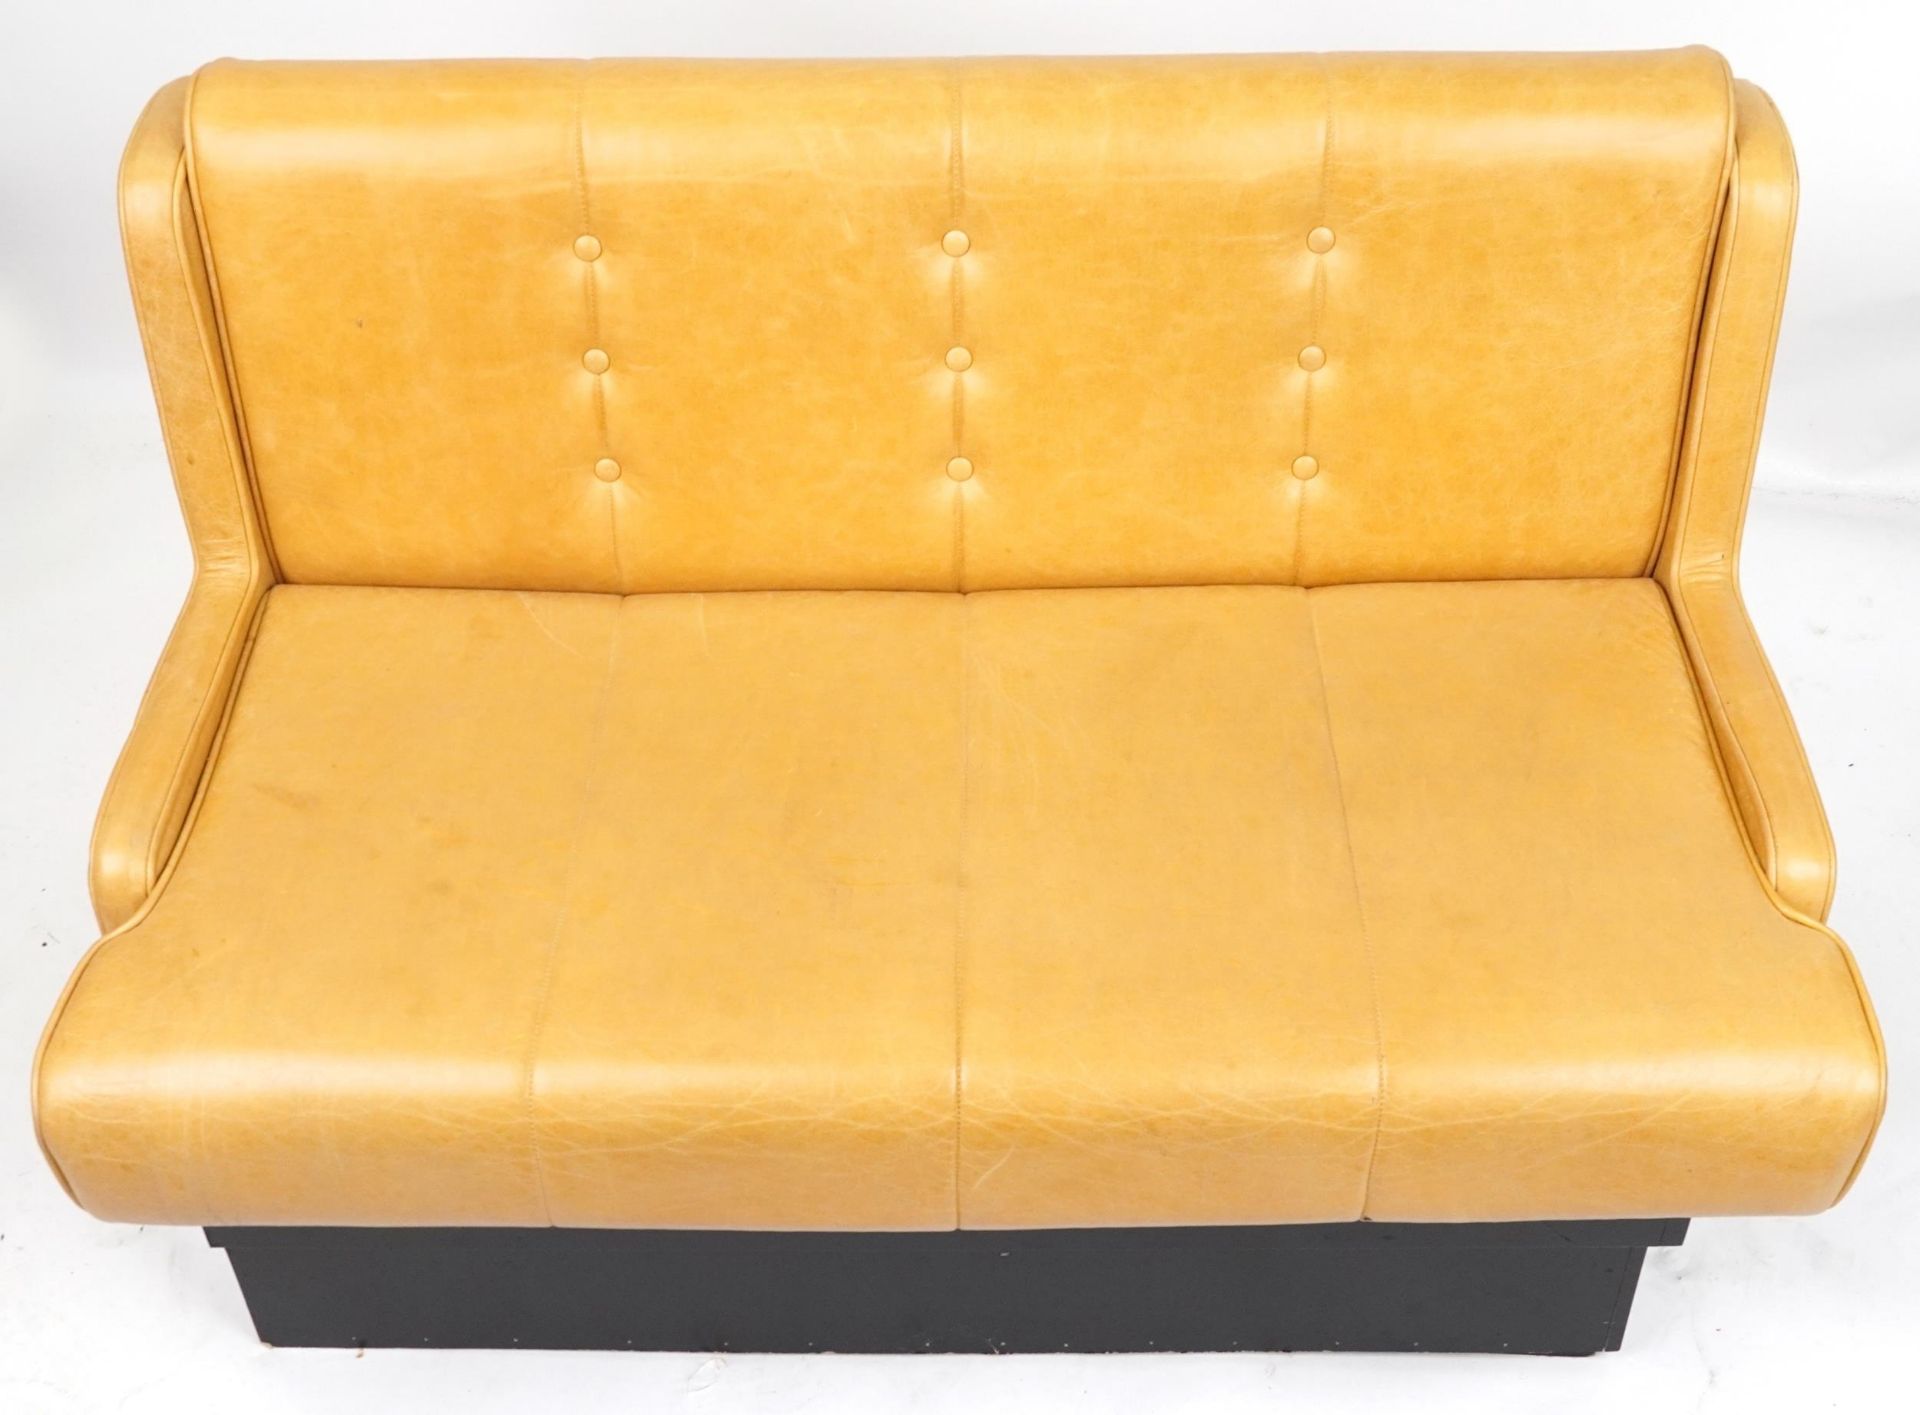 Mustard leather two seater boudoir bench, 120cm wide - Image 3 of 4